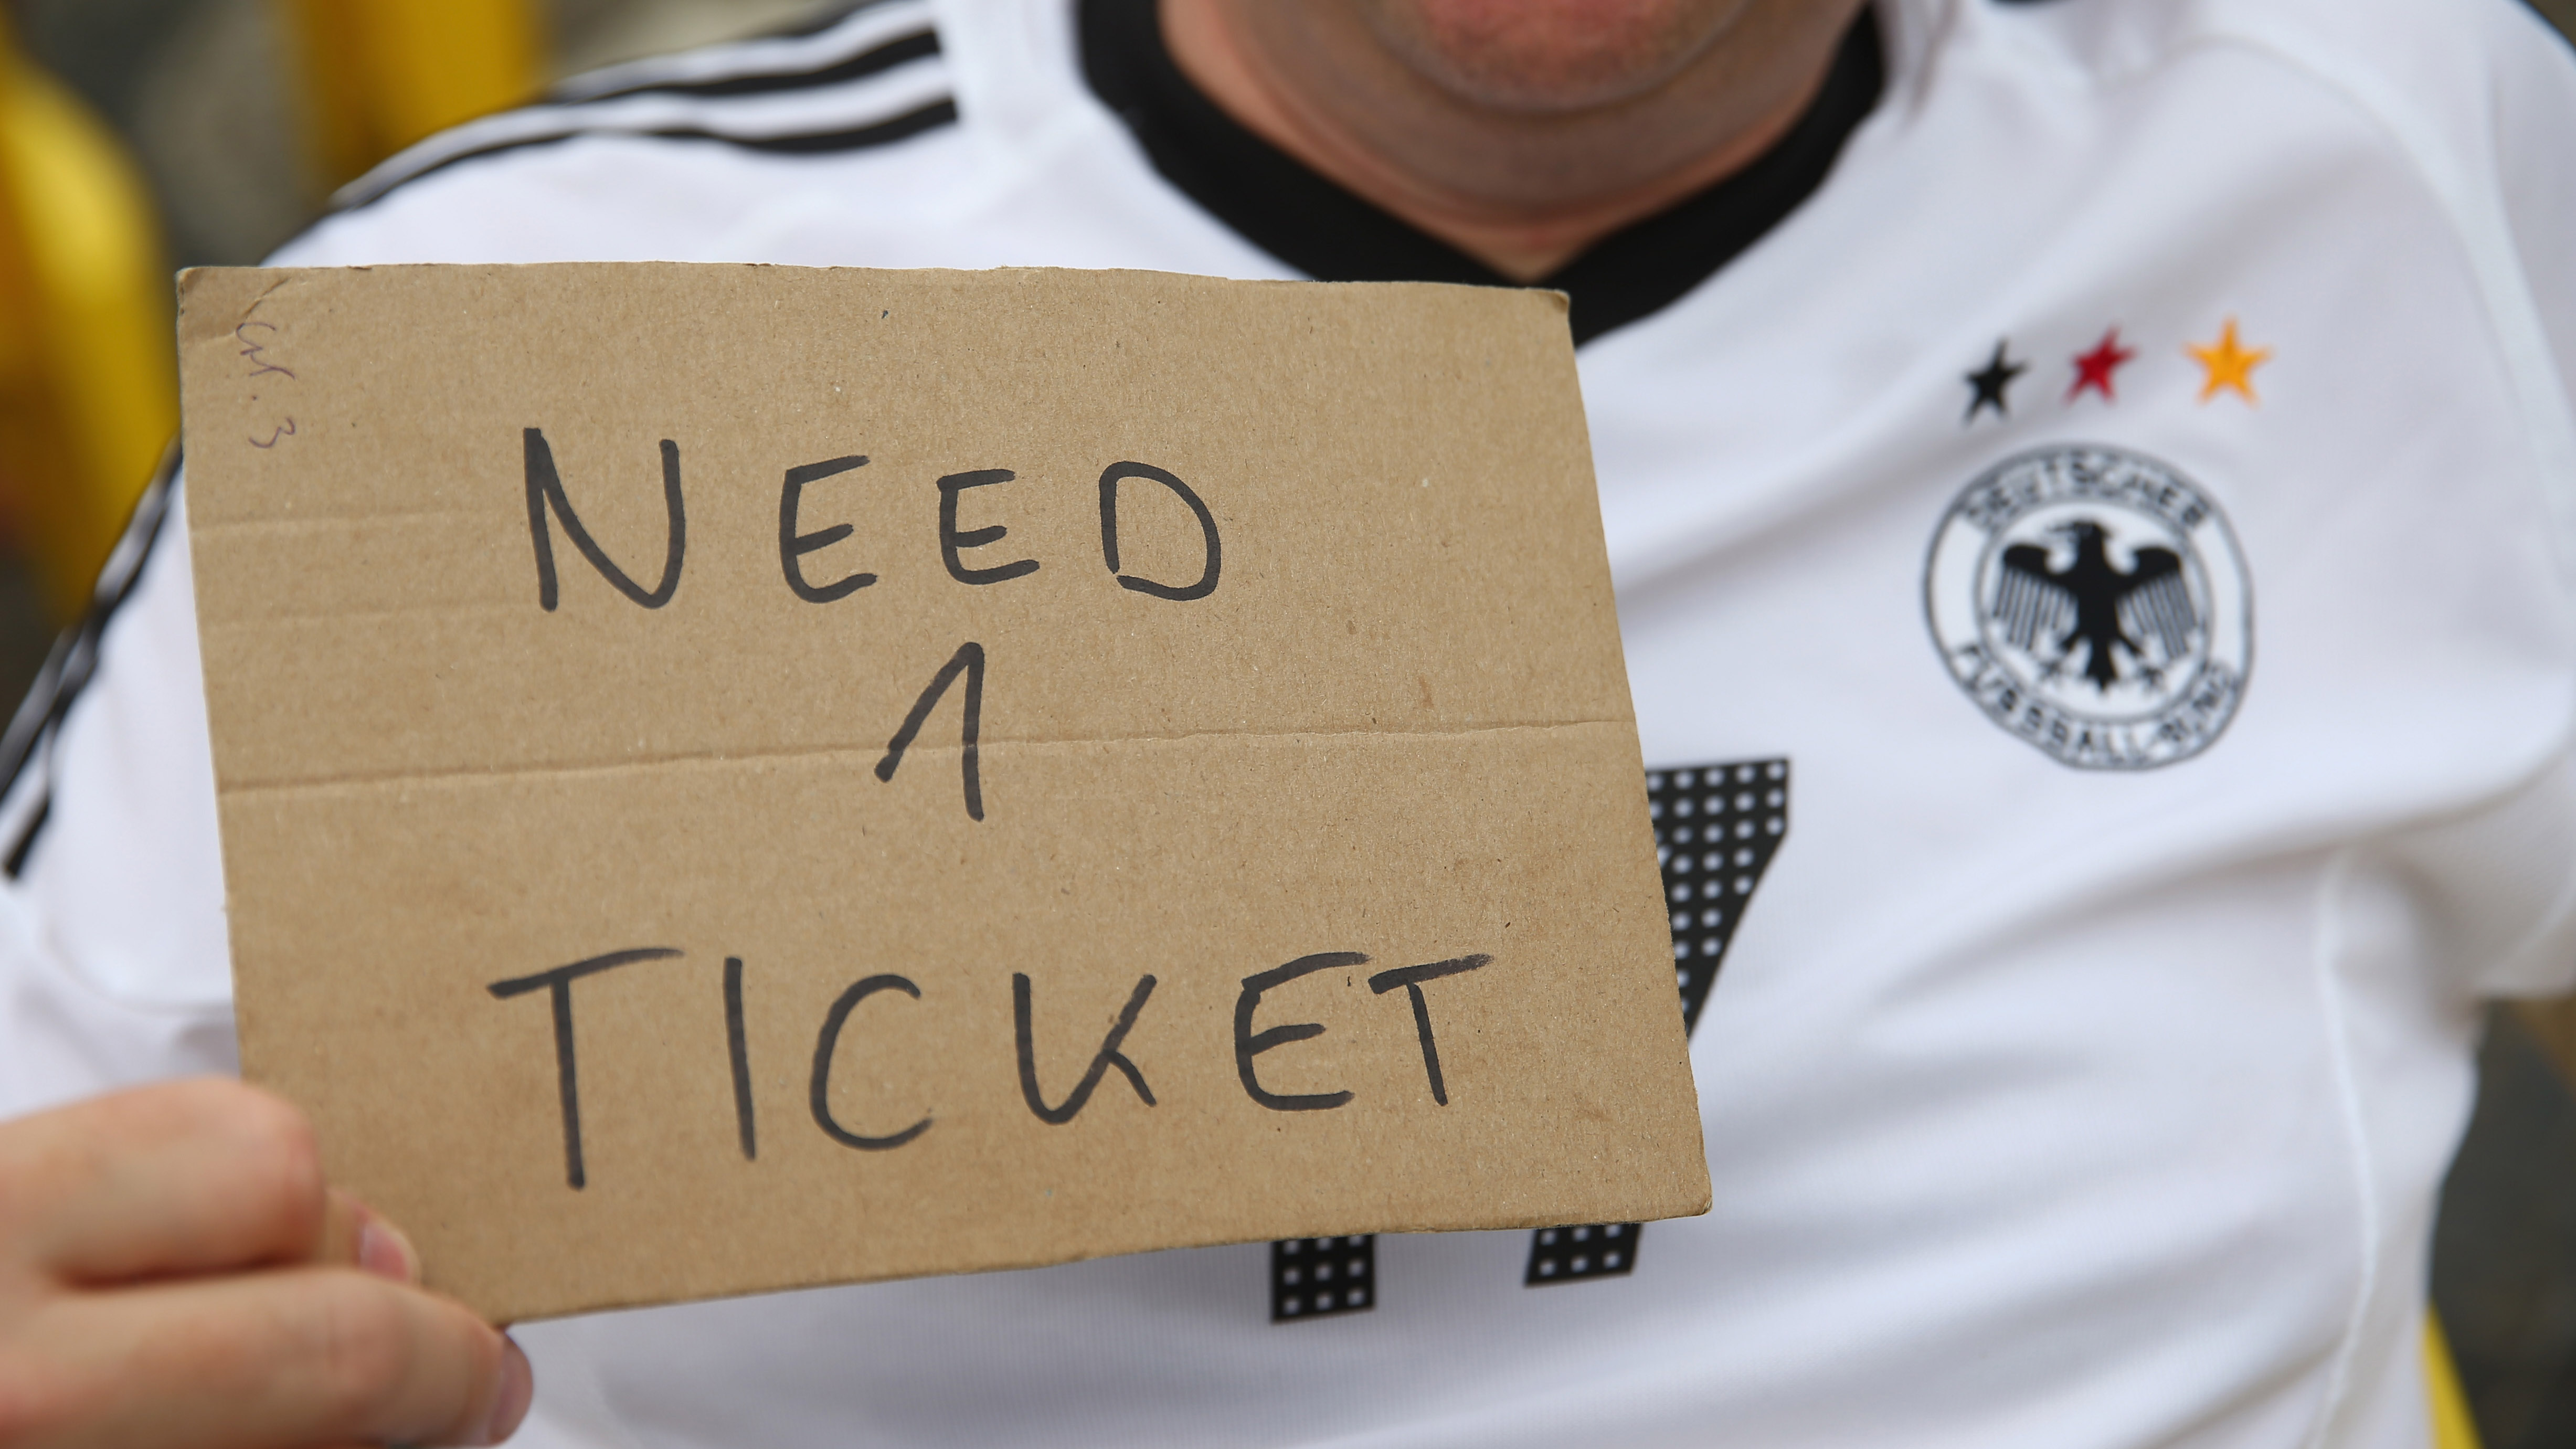 World Cup 2018: Can I buy and use tickets from touts or scalpers in